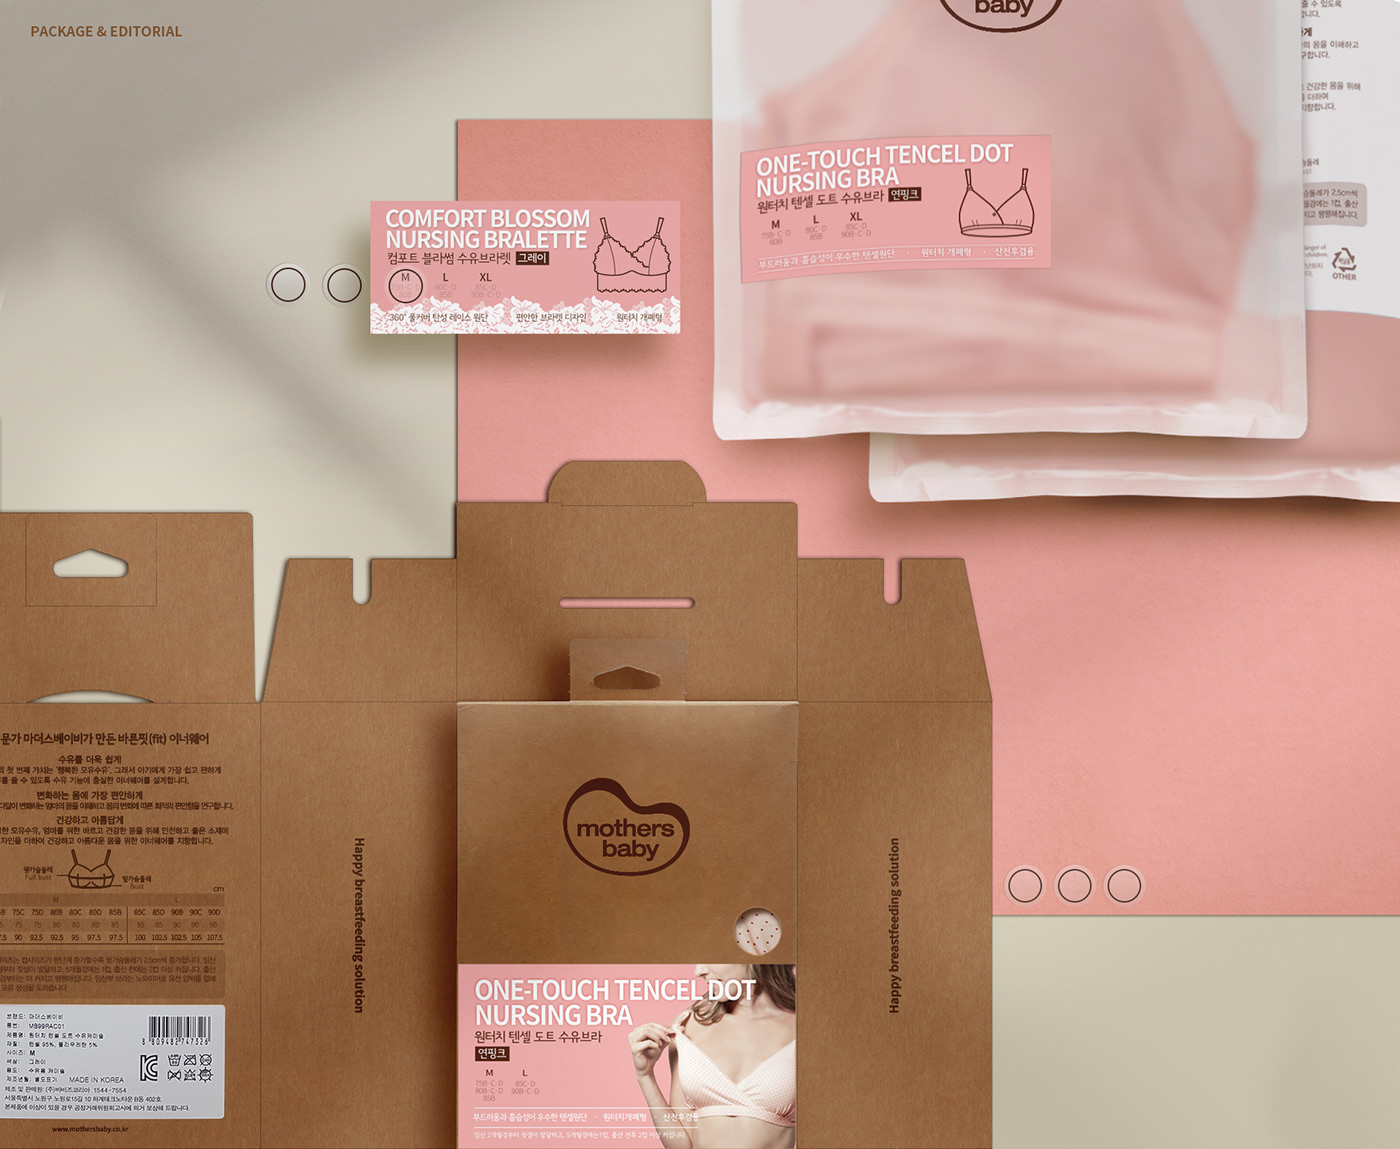 craftpaper design editorial graphic package pregnant product box branding  brochure